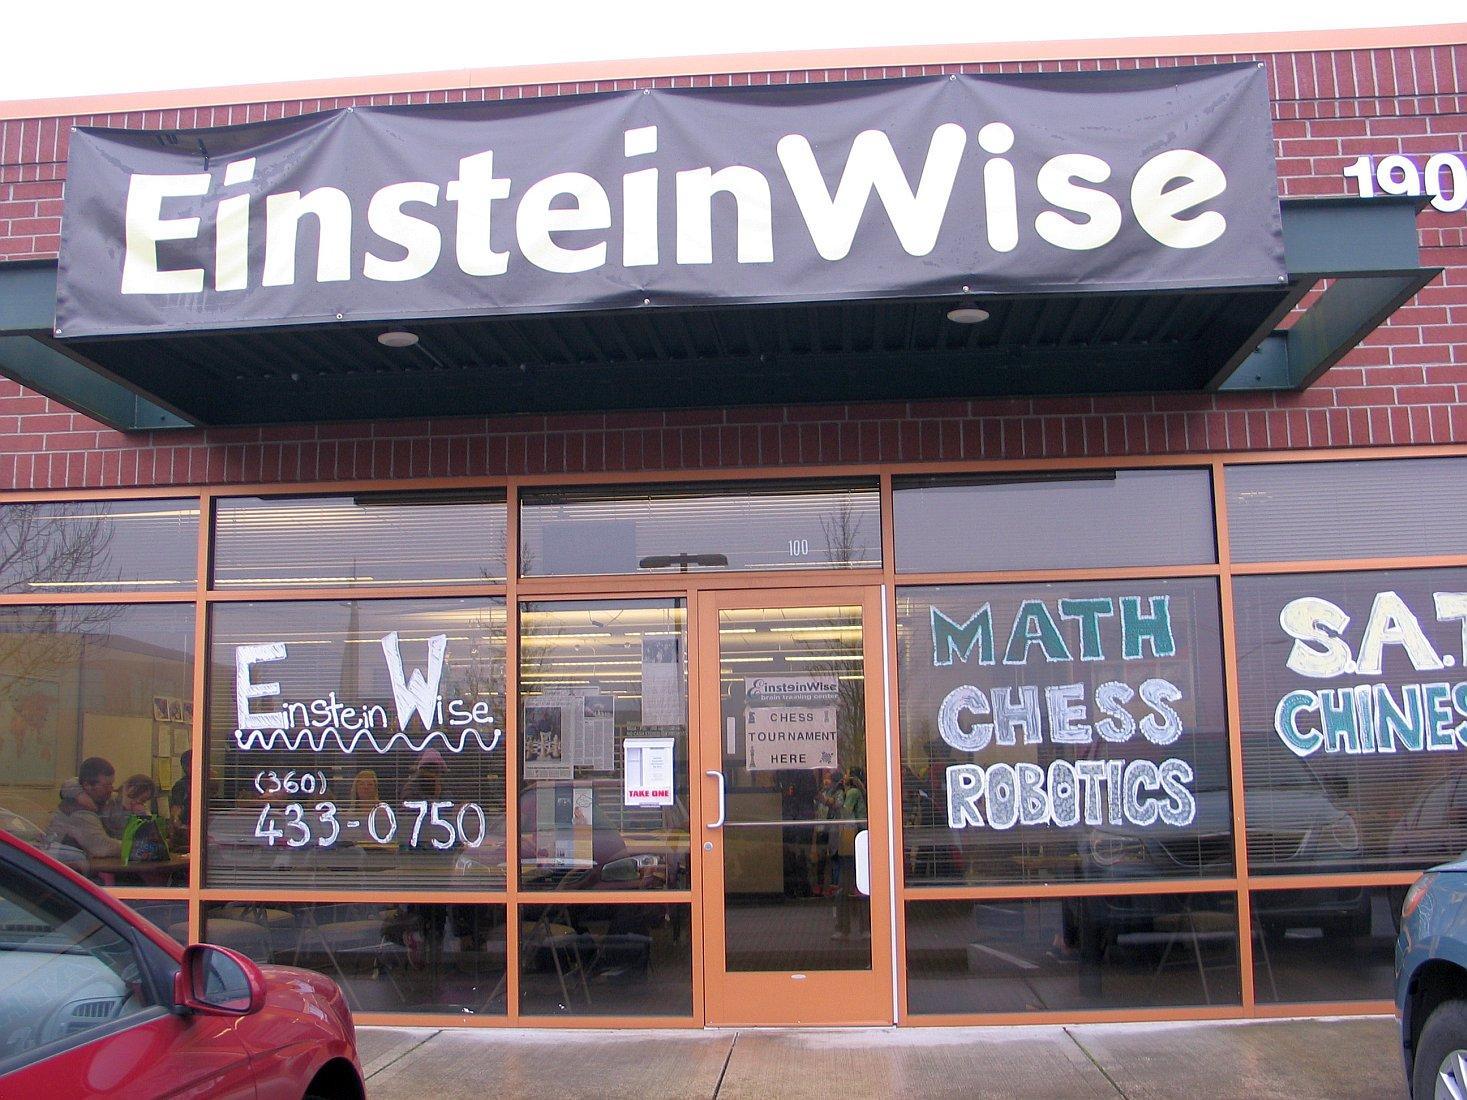 EinsteinWise building in East Vancouver Washington. Photo Credit: Russell Miller